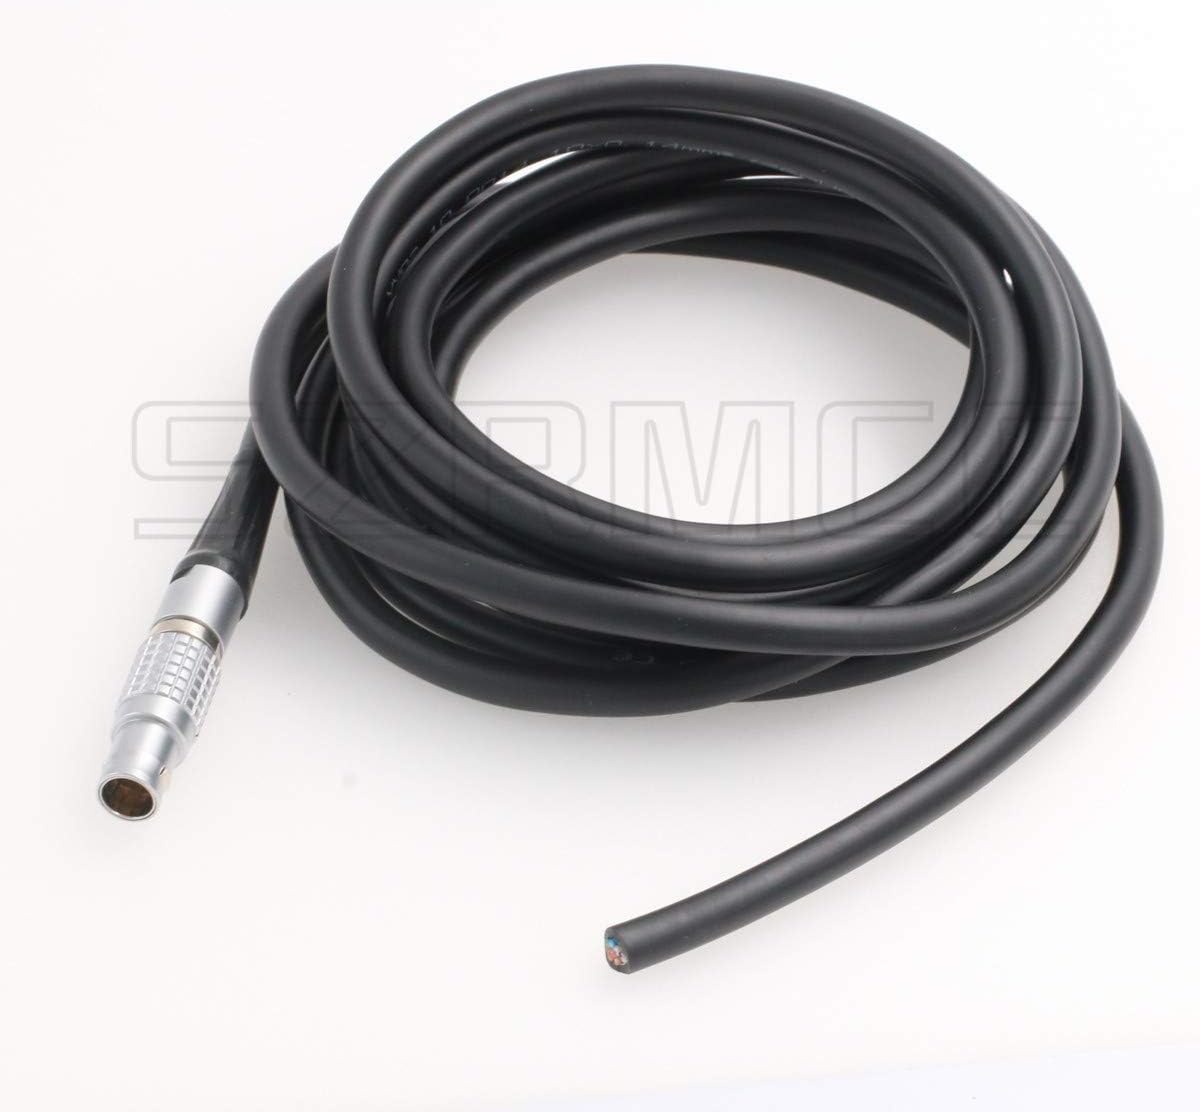 10 pin extension cable male to female computer diy